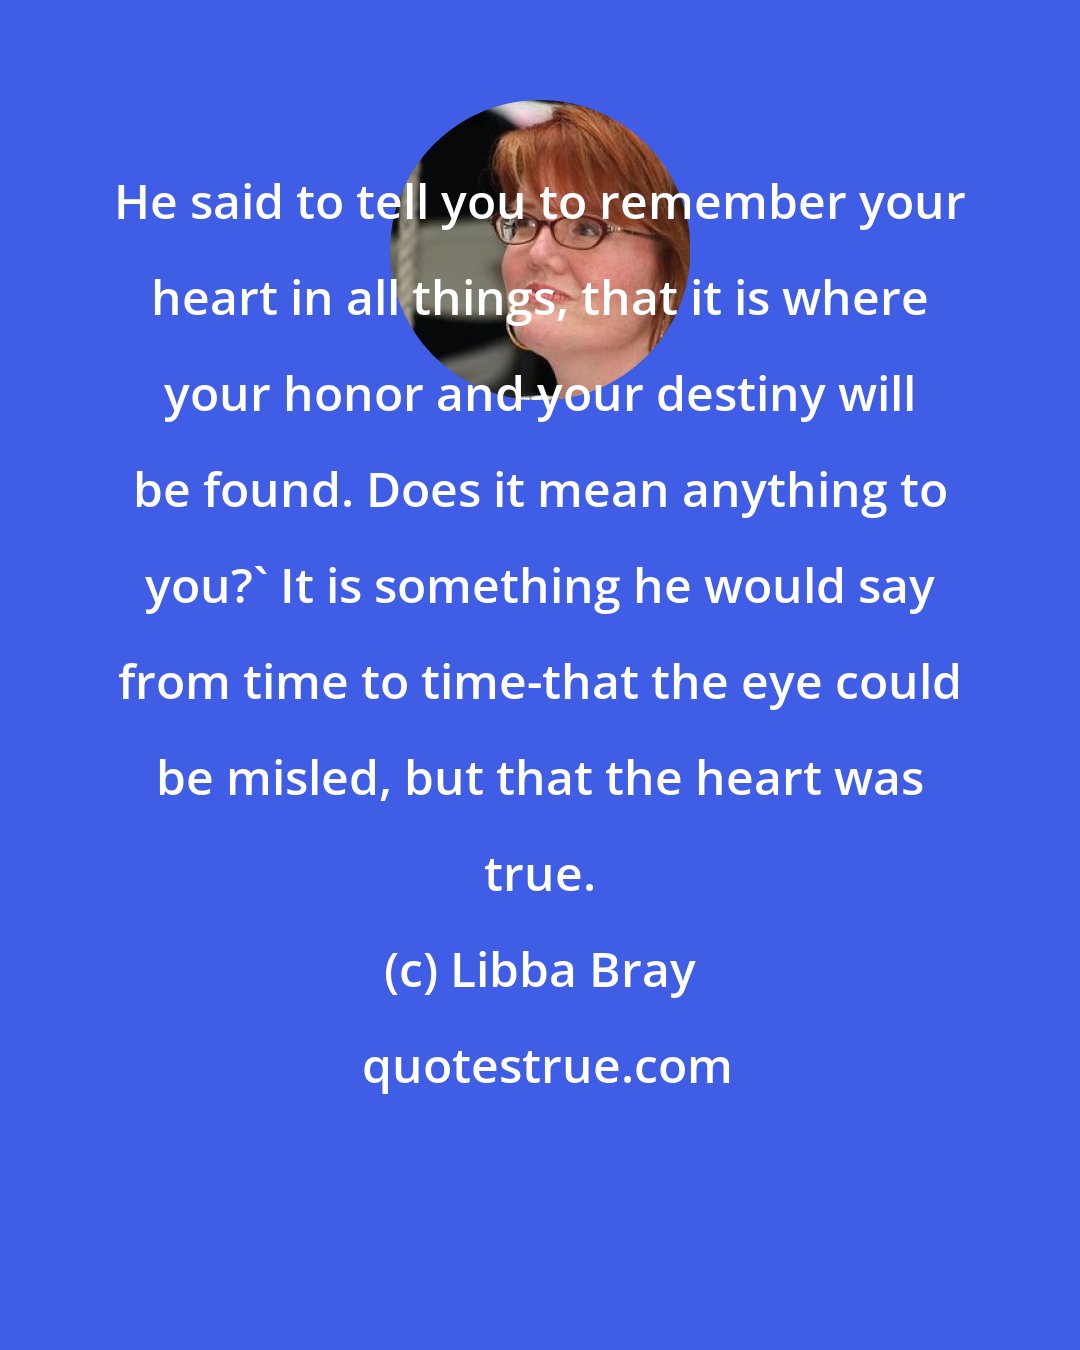 Libba Bray: He said to tell you to remember your heart in all things, that it is where your honor and your destiny will be found. Does it mean anything to you?' It is something he would say from time to time-that the eye could be misled, but that the heart was true.